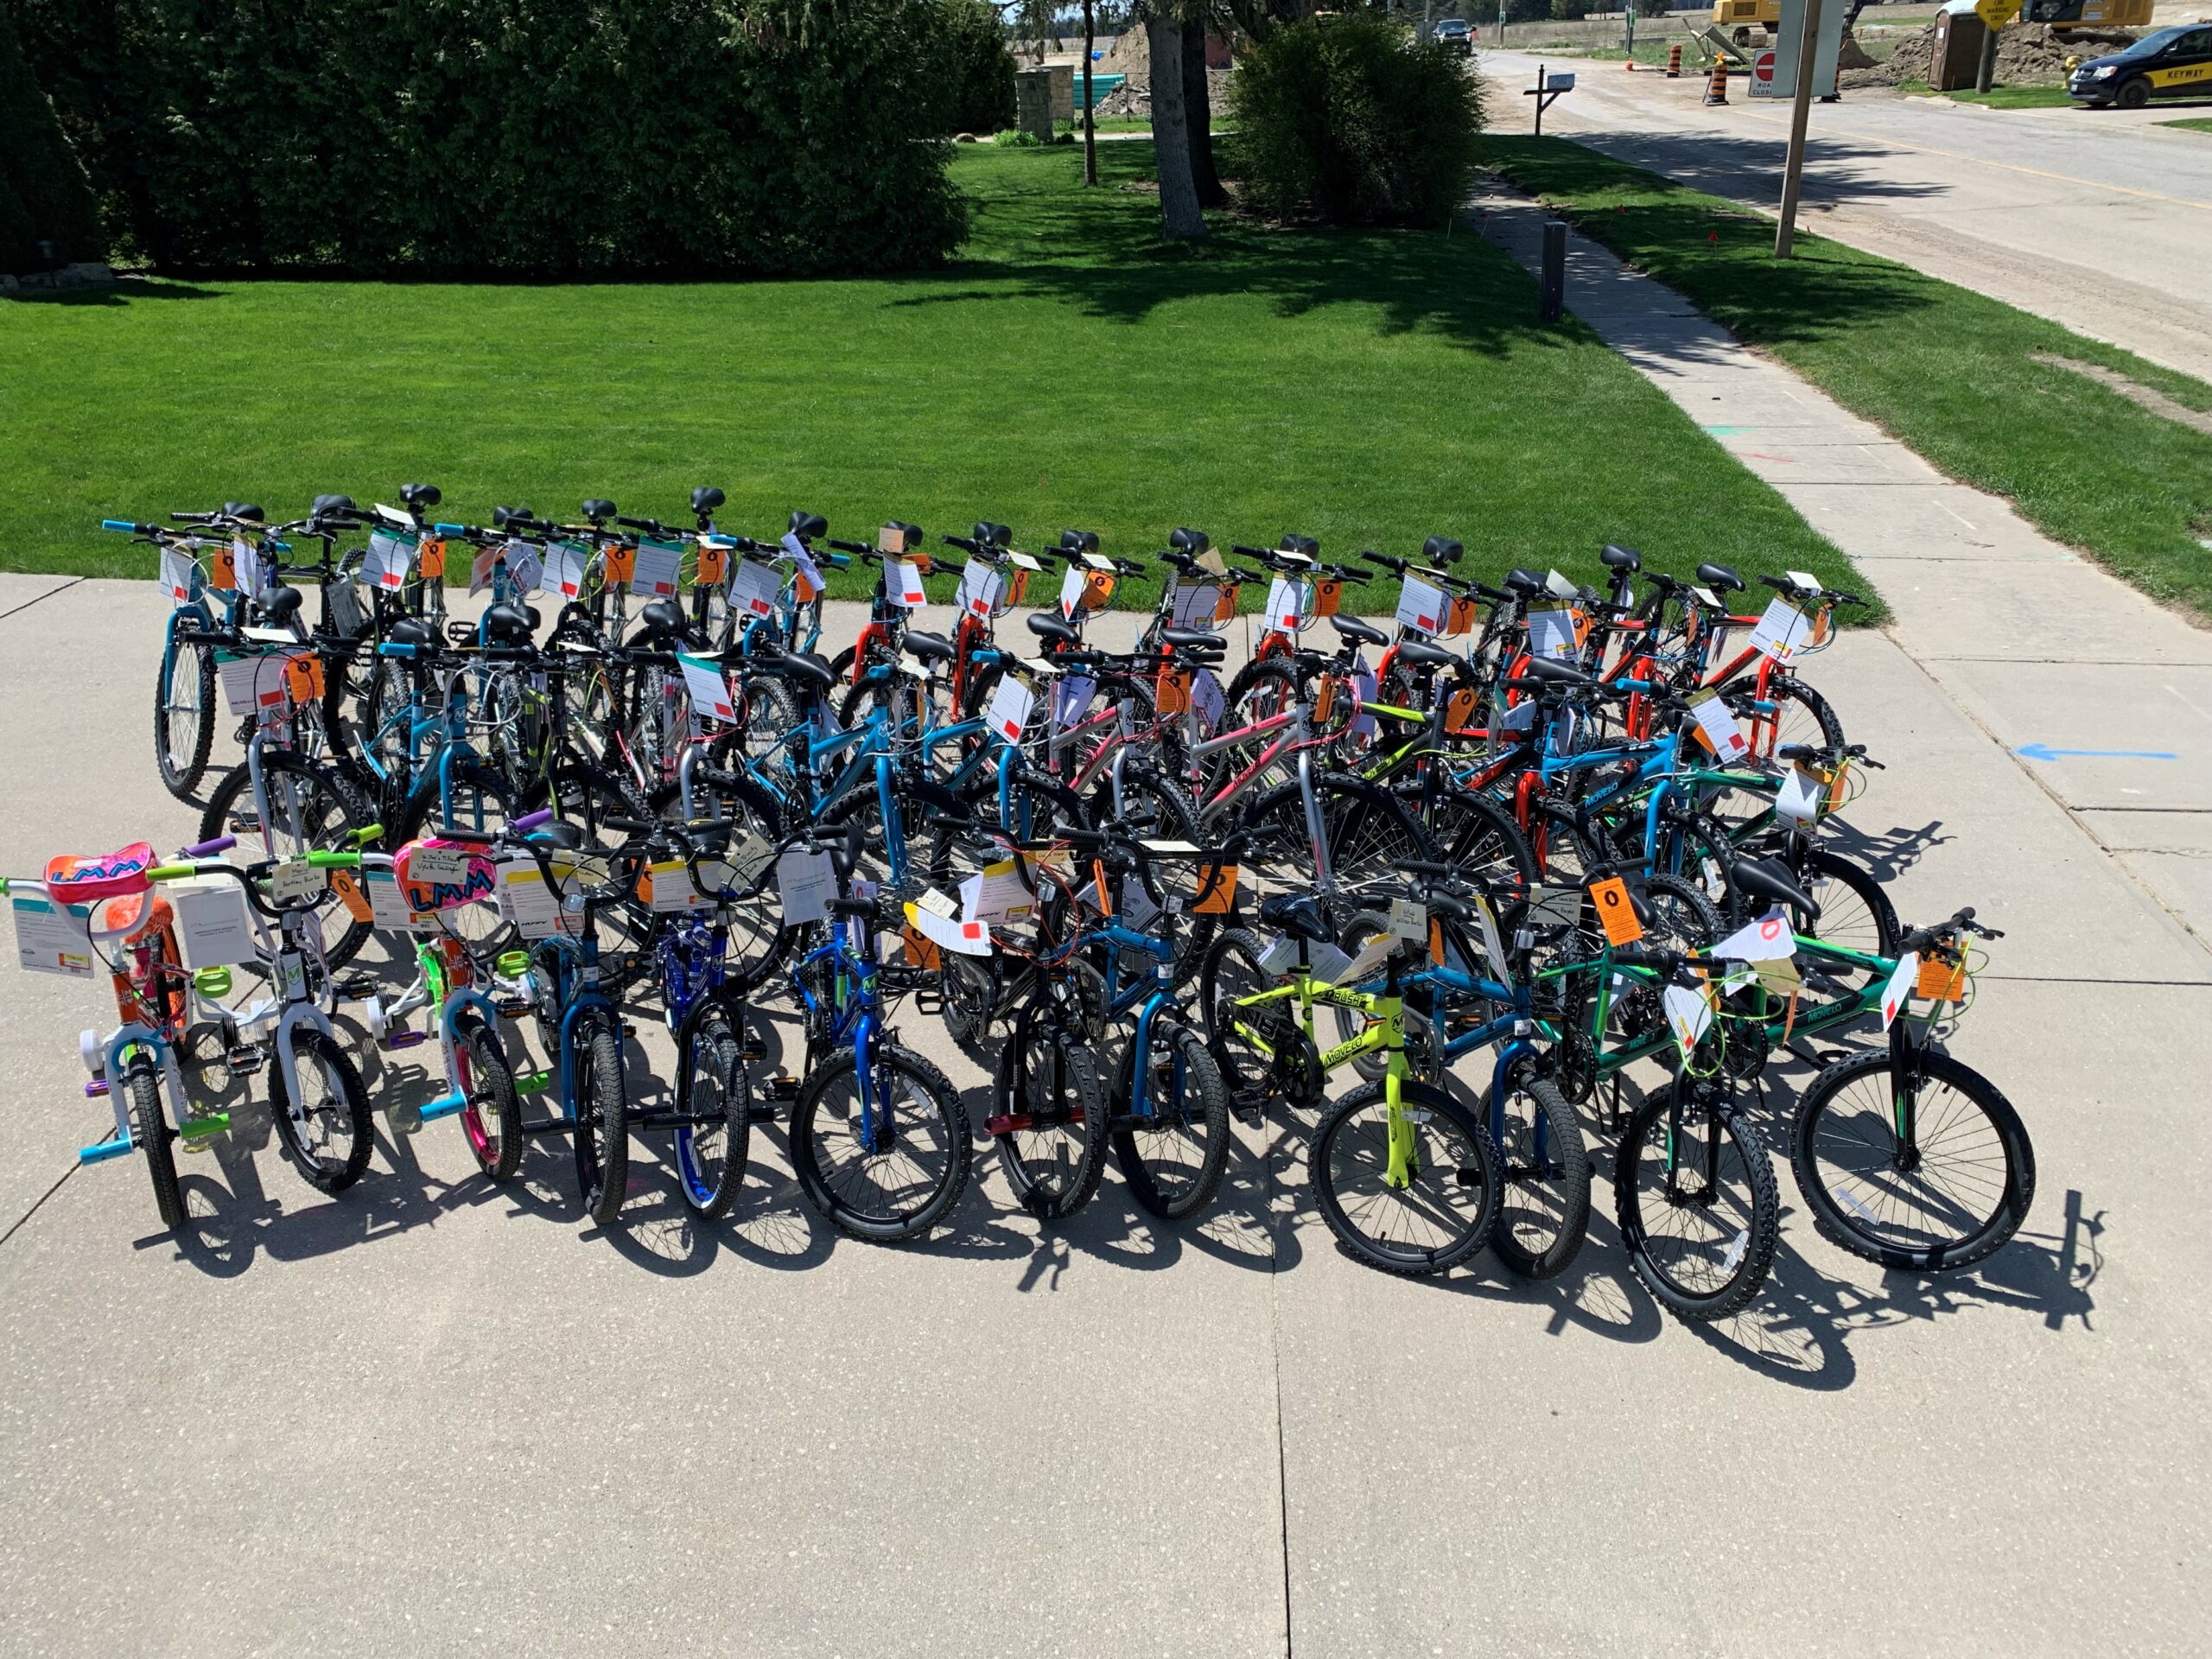 Catholic Teachers’ Association Purchases 40 Bicycles and Helmets for Students in Board-Wide Employee Fundraiser